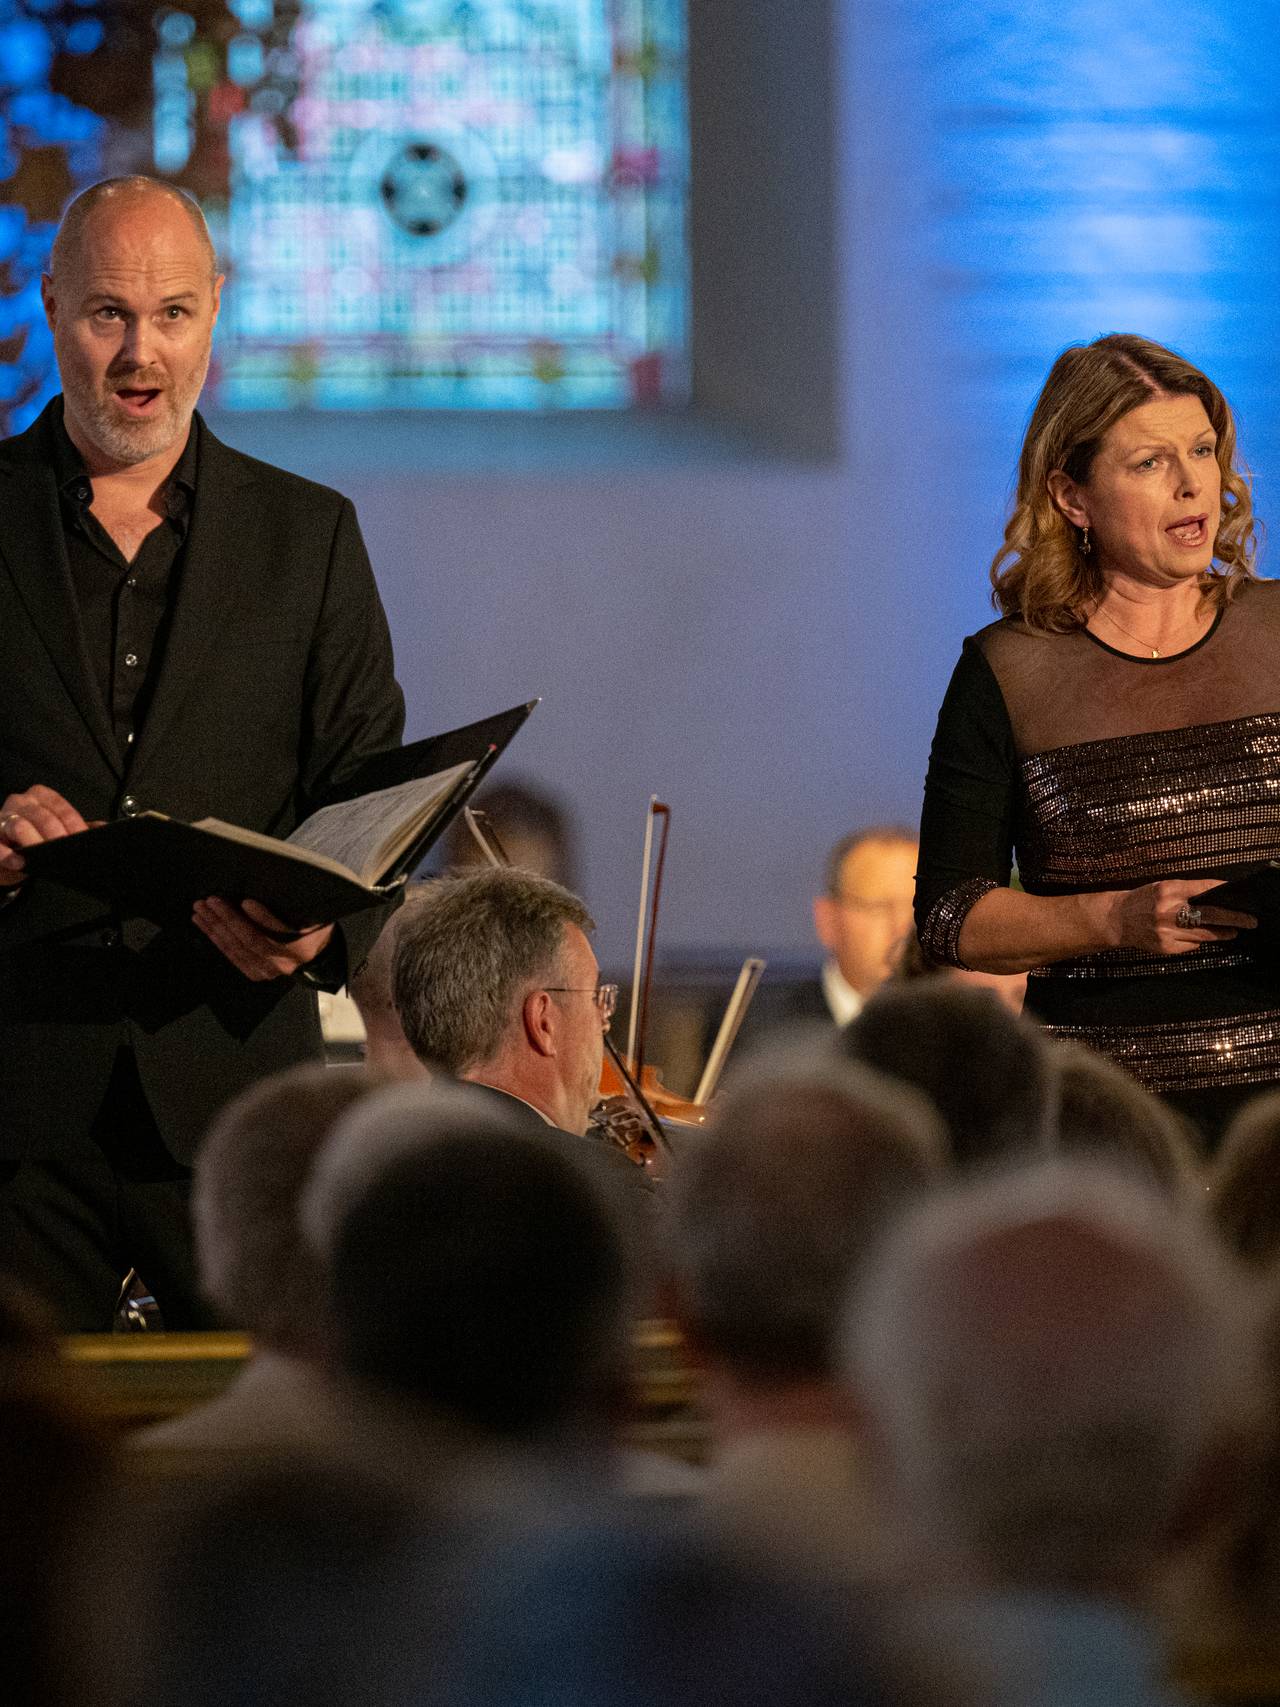 From Mozart's Requiem performance during the Chamber Music Festival in Oslo 2022.